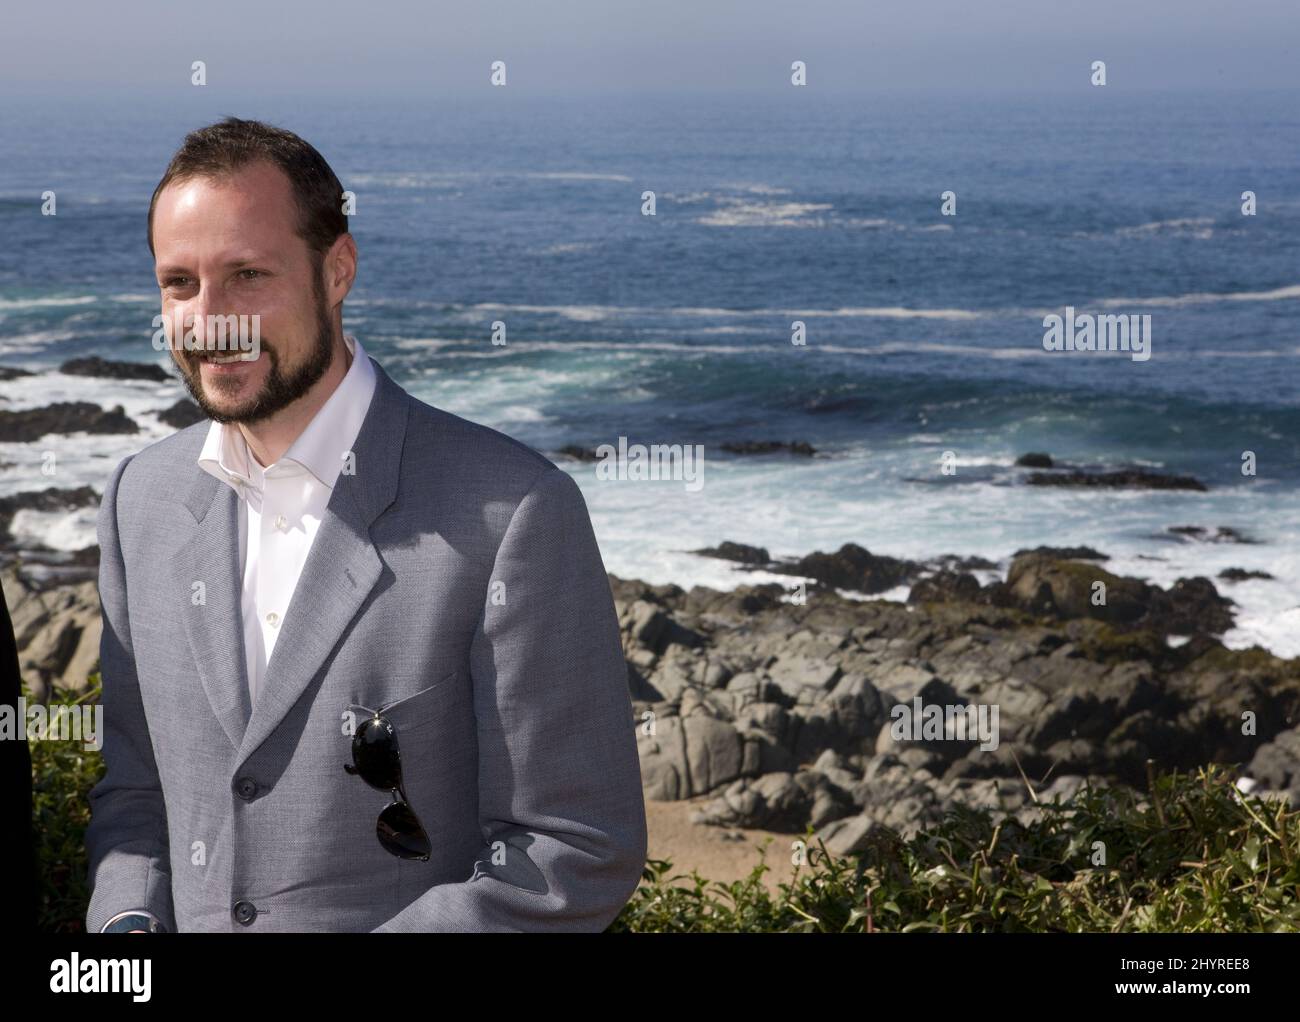 Crown Prince Haakon of Norway, on the last day of his official visit to Chile, visits Isla Negra, the former home of Chilean Poet, Pablo Neruda, who died in 1973. Stock Photo